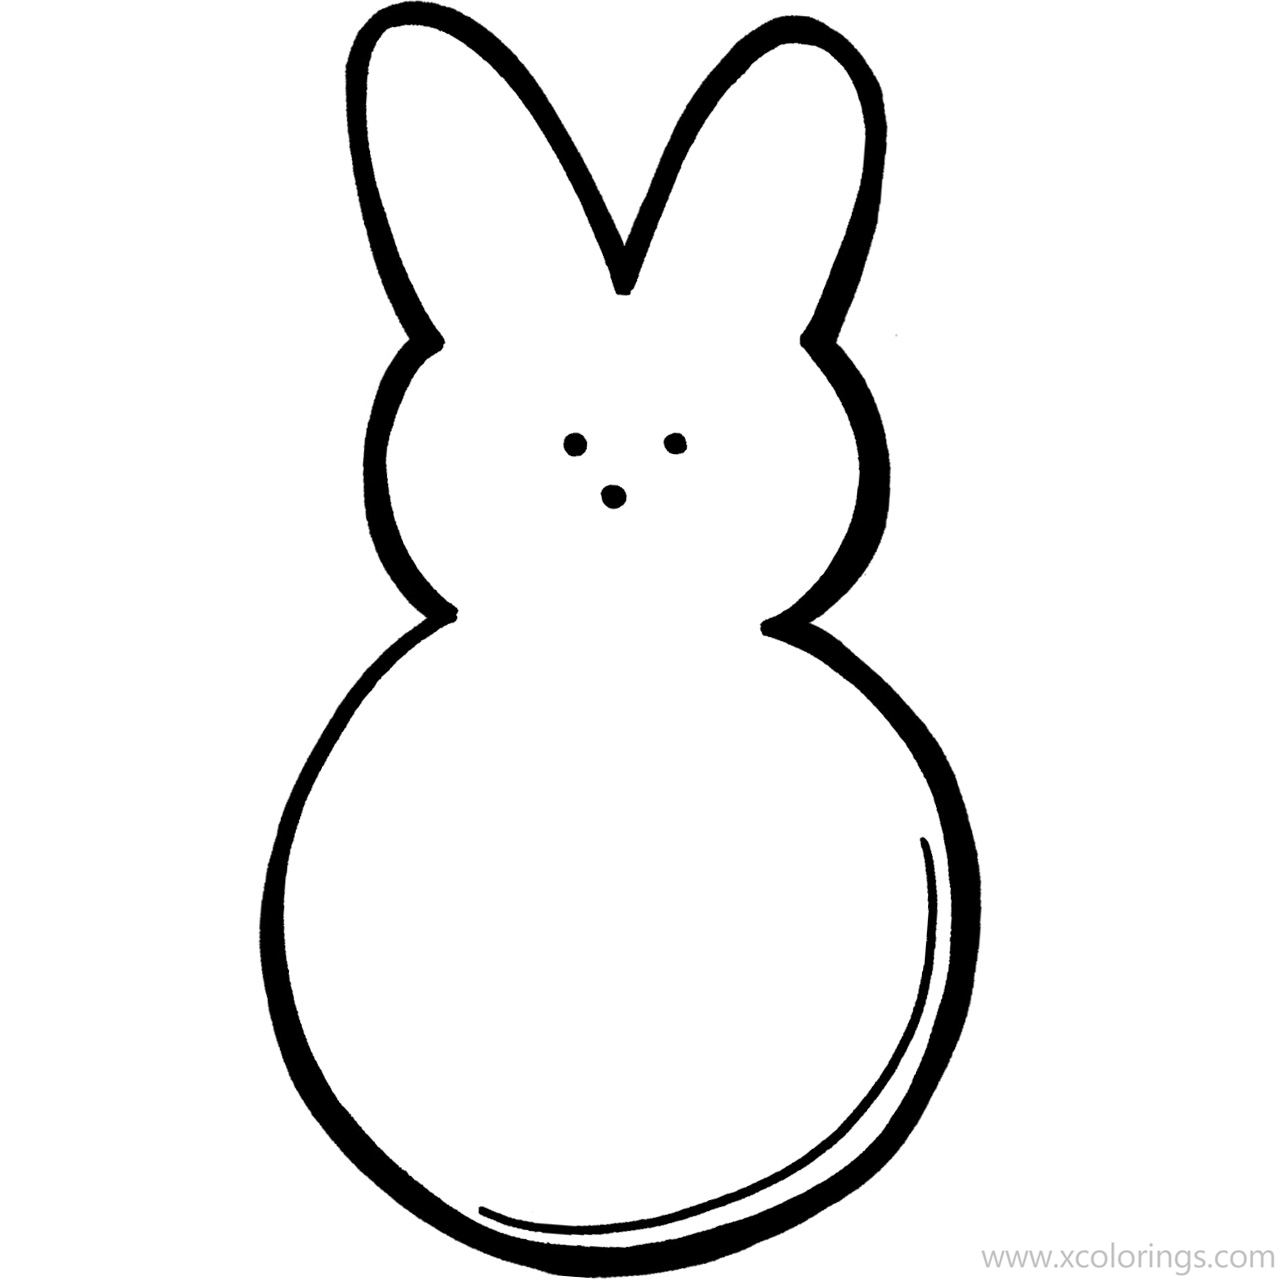 Free Marshmallow Peeps Coloring Pages Sketch printable